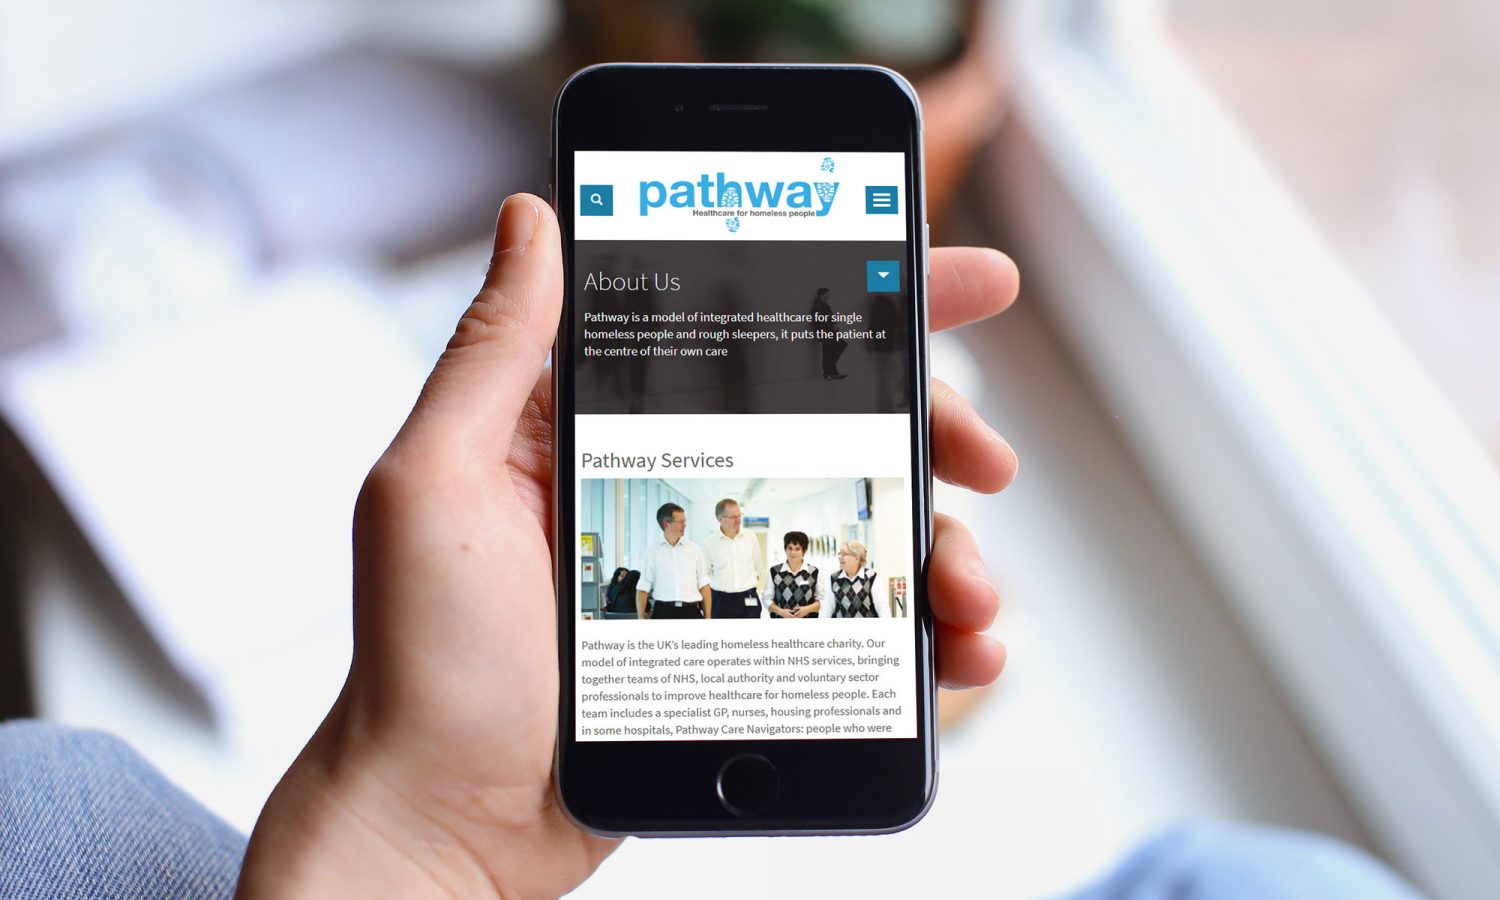 Pathway website on mobile